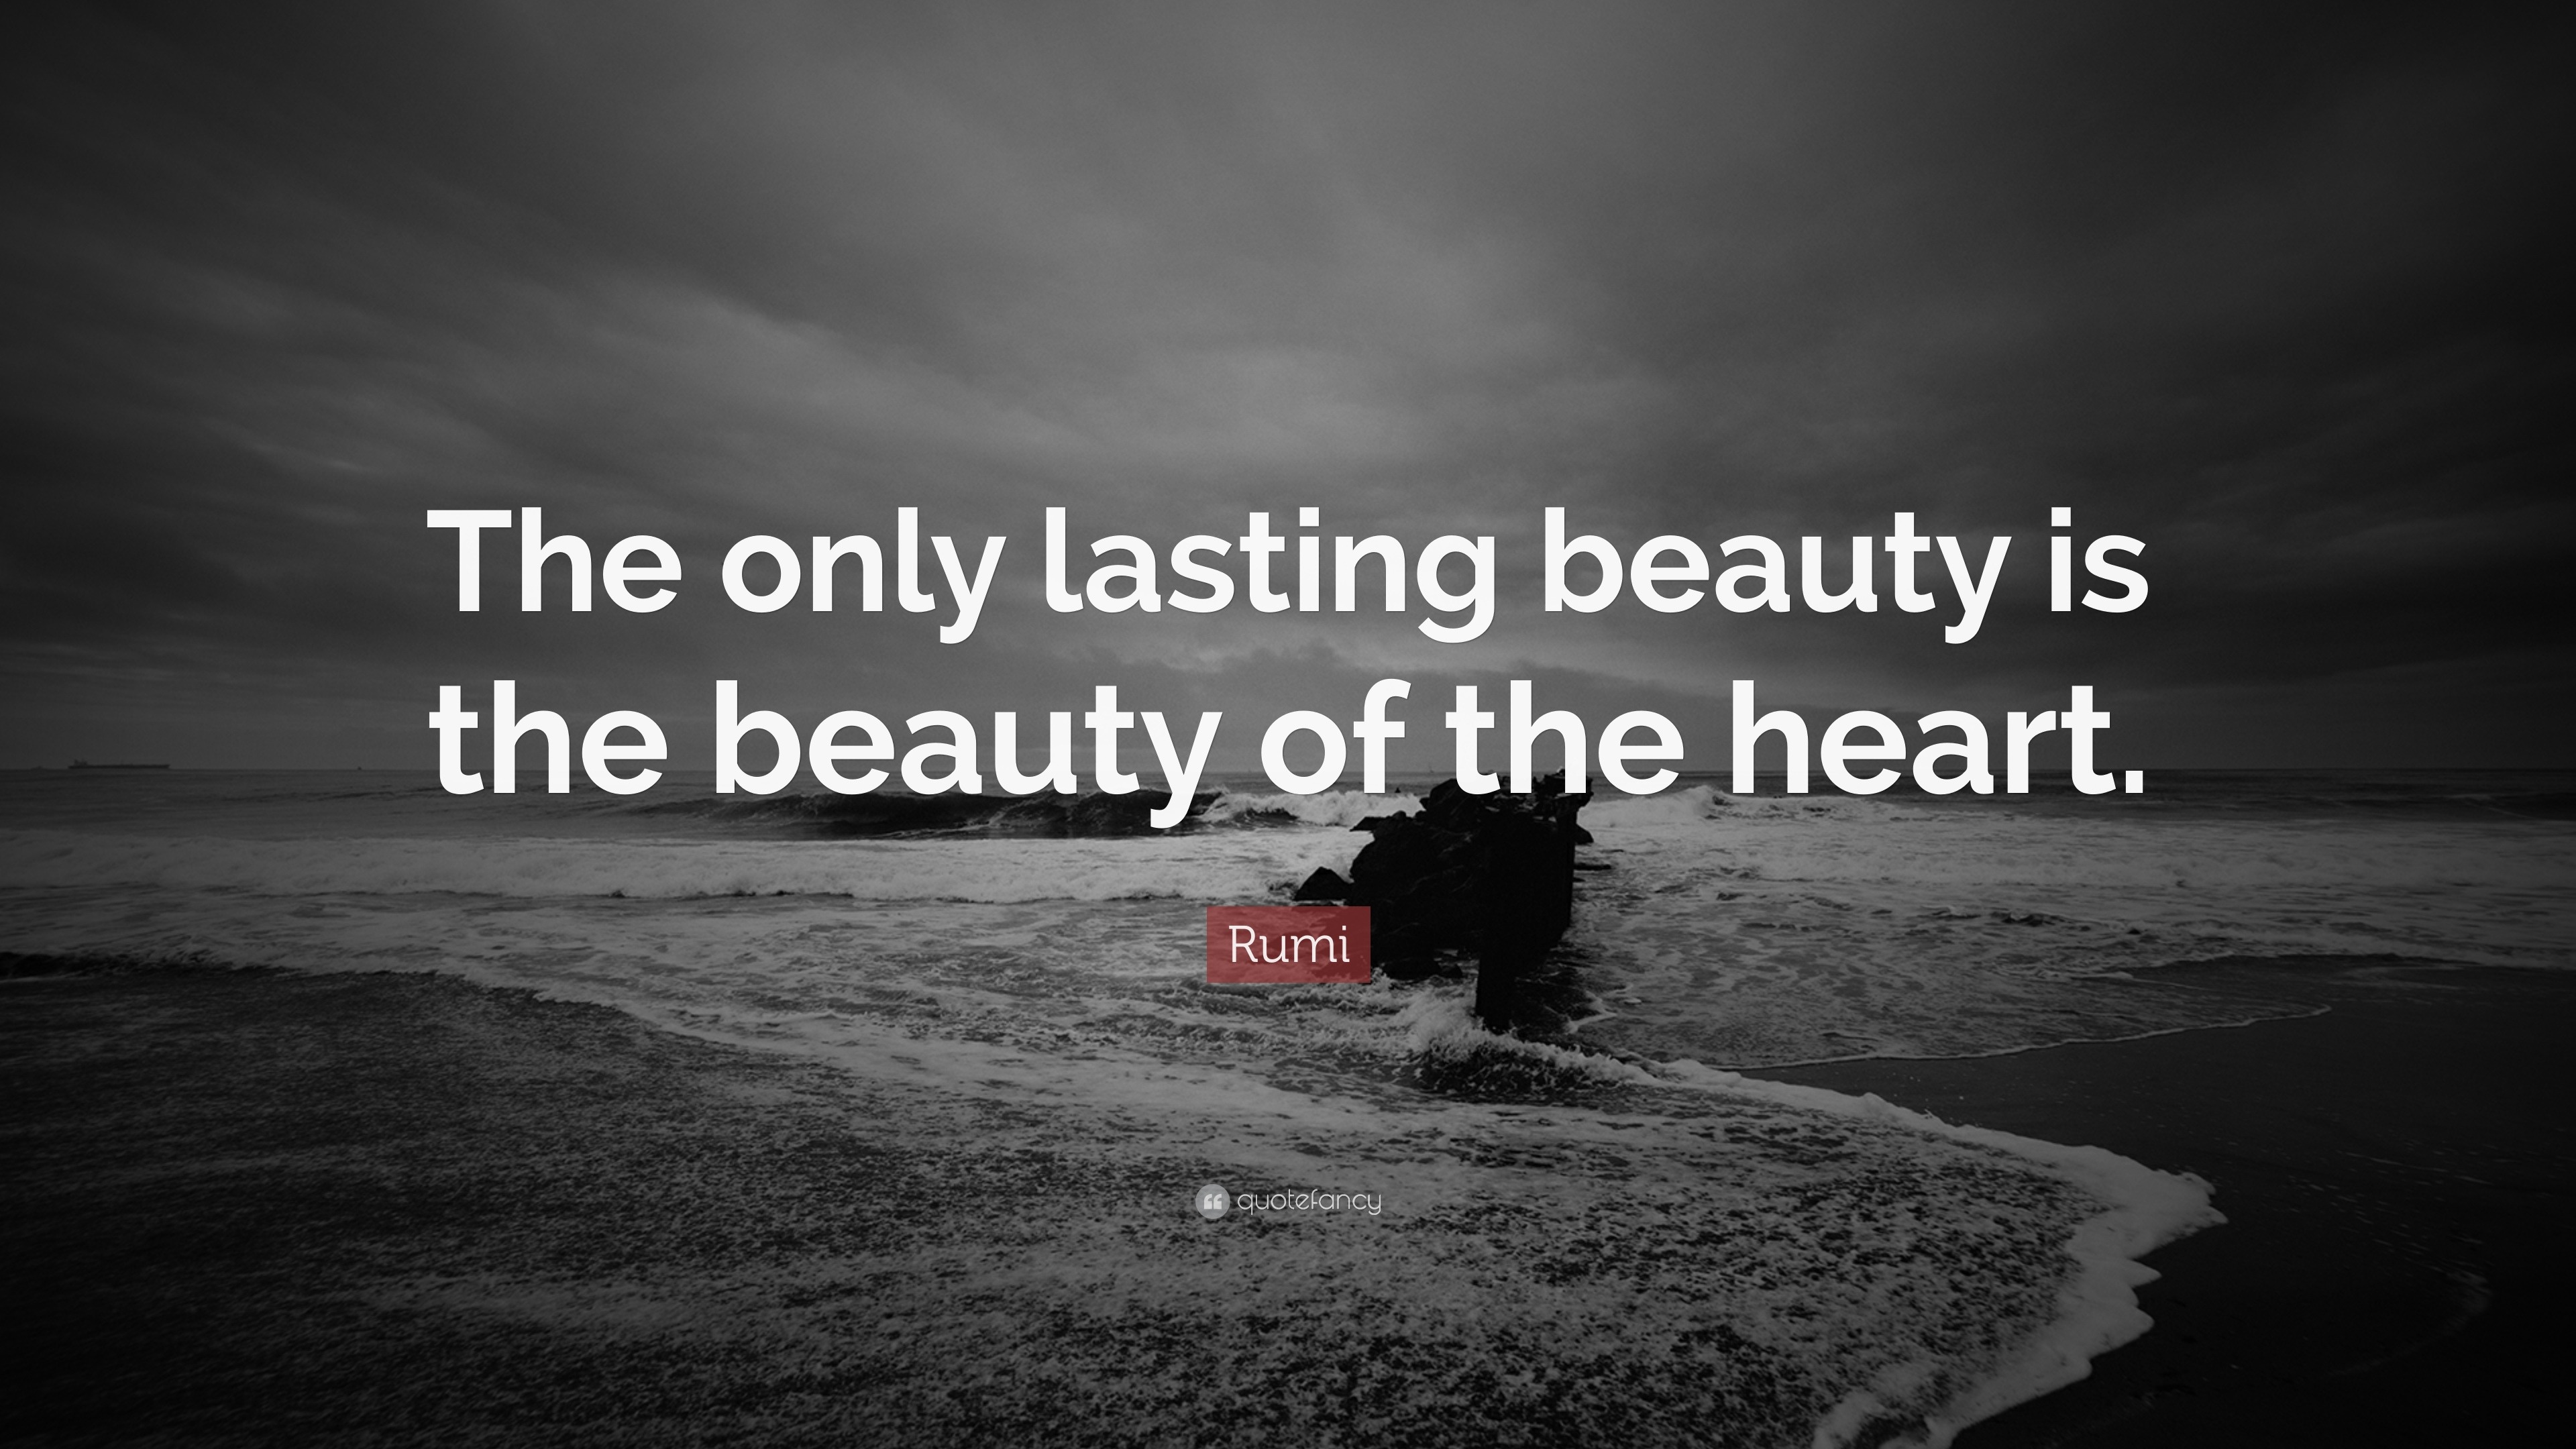 Rumi Quote: “The only lasting beauty is the beauty of the heart.” (12